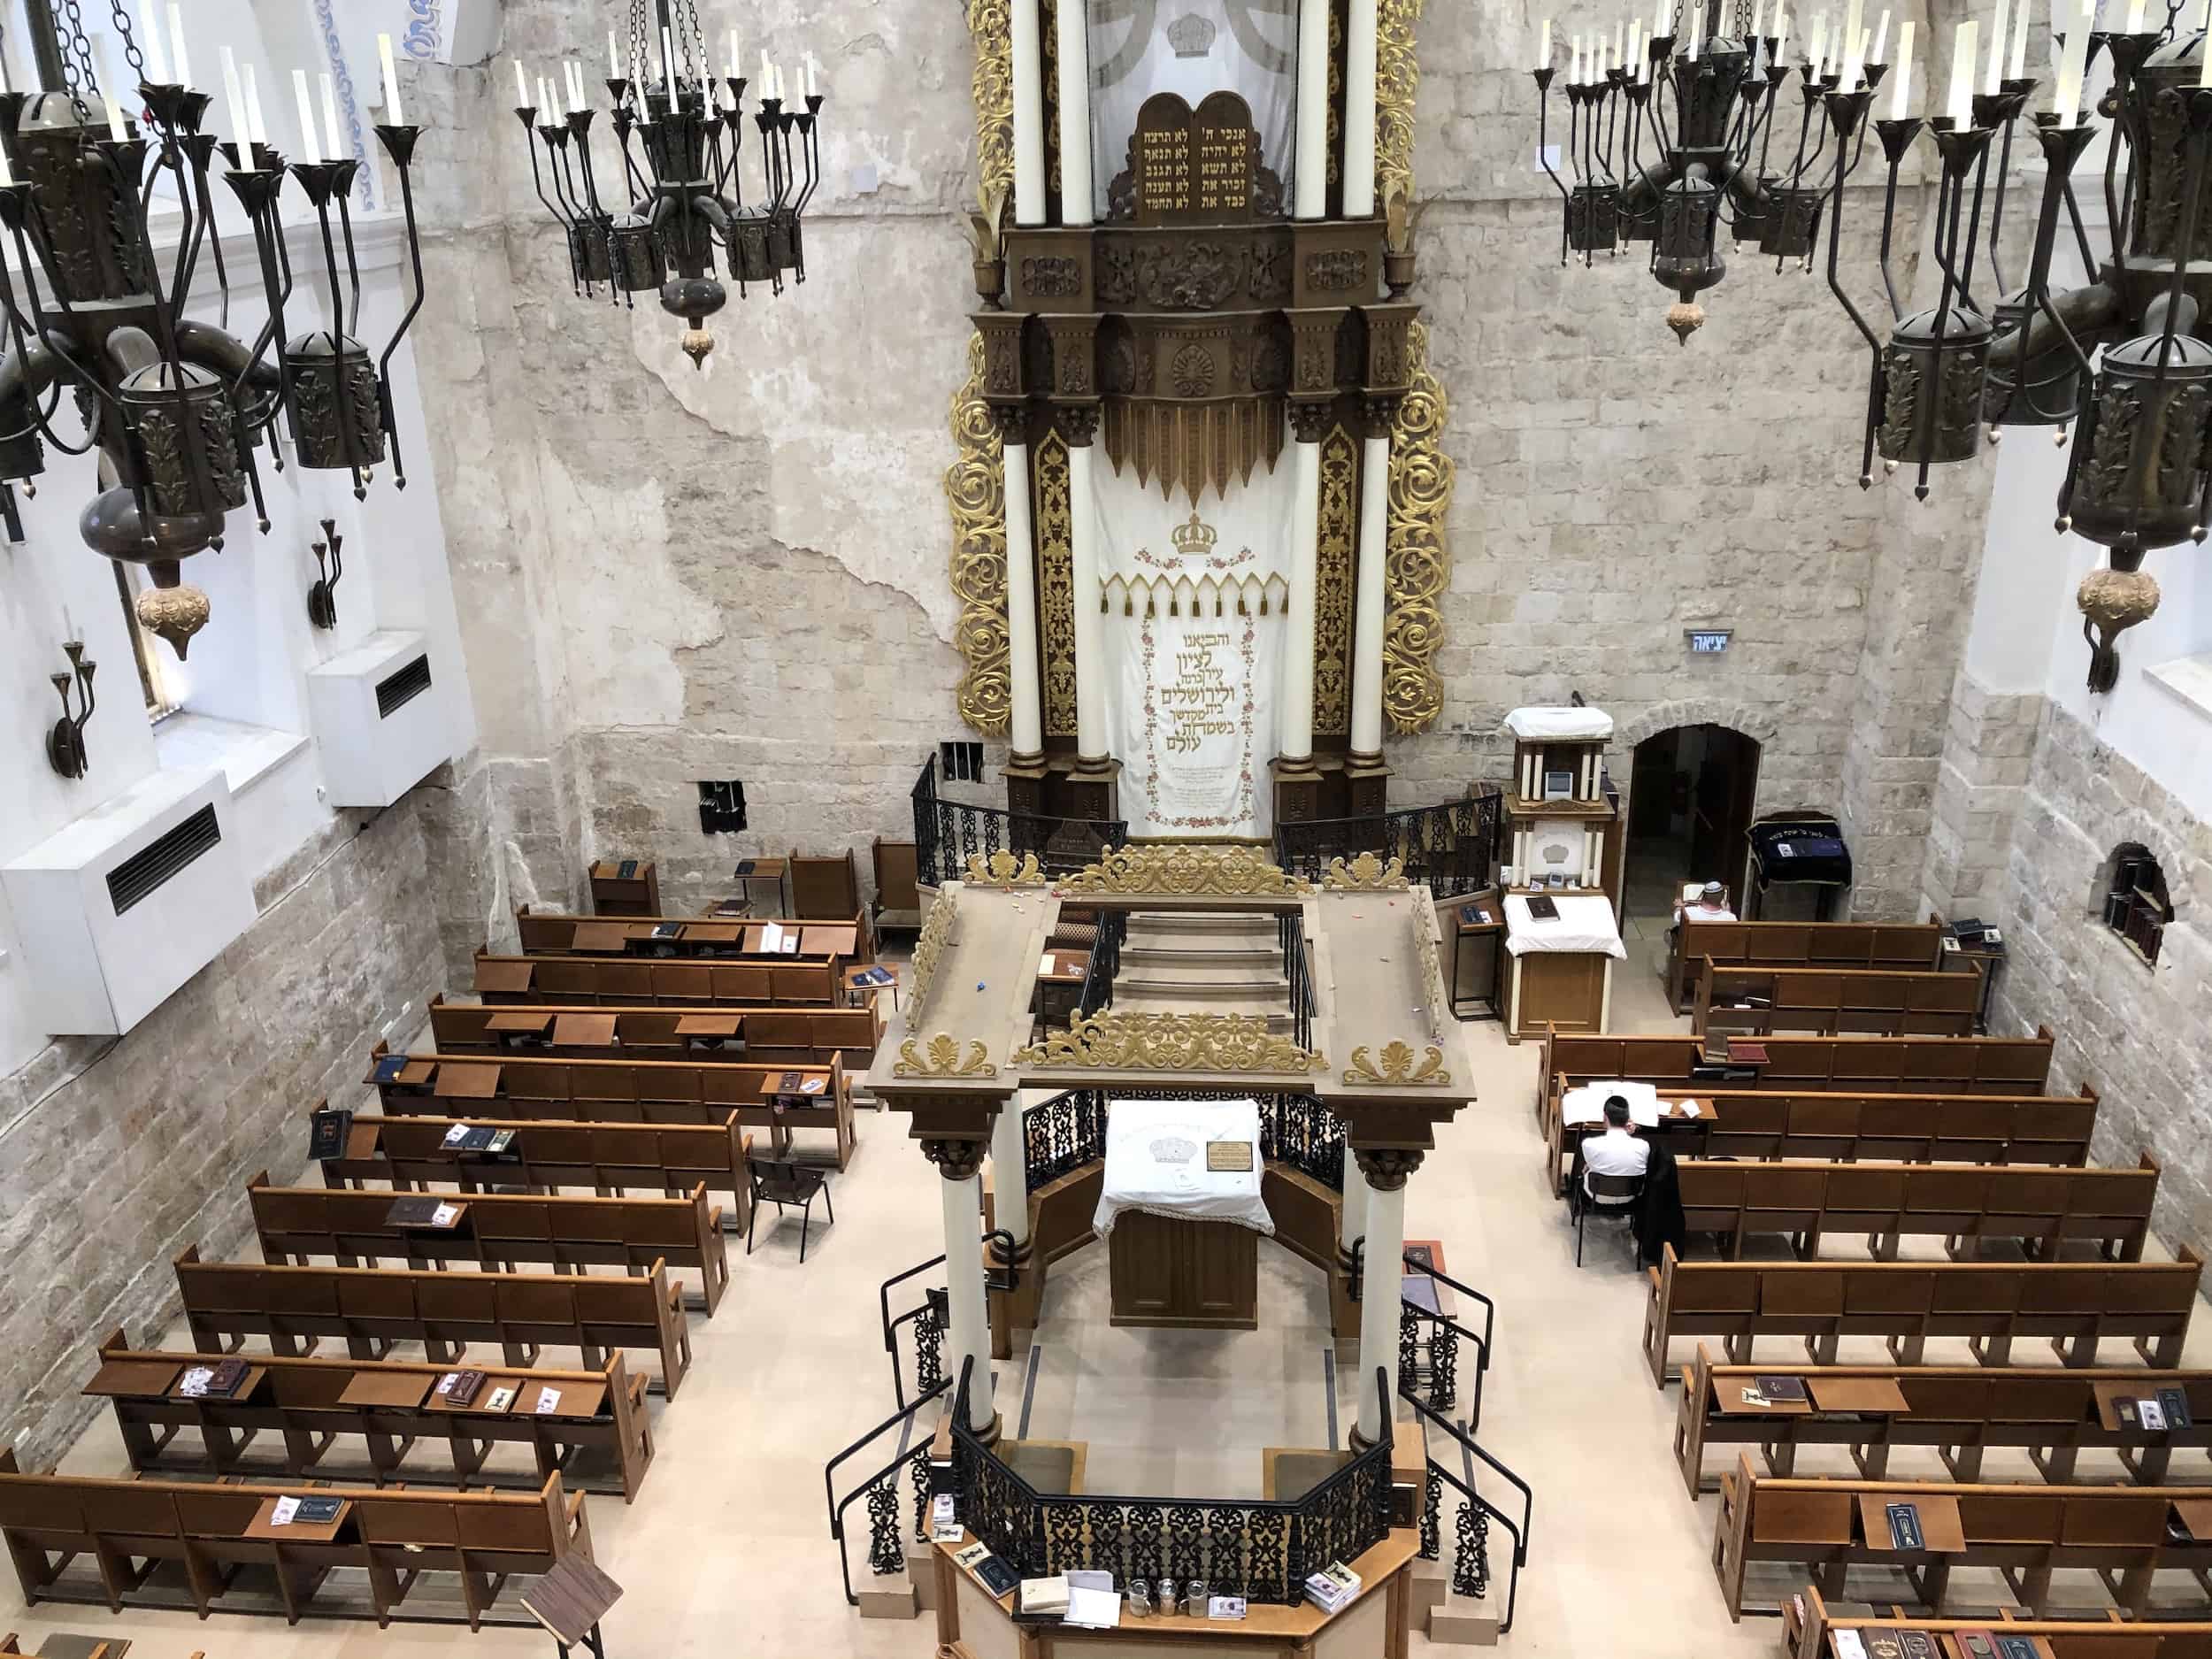 Hurva Synagogue from the women's gallery in the Jewish Quarter of Jerusalem